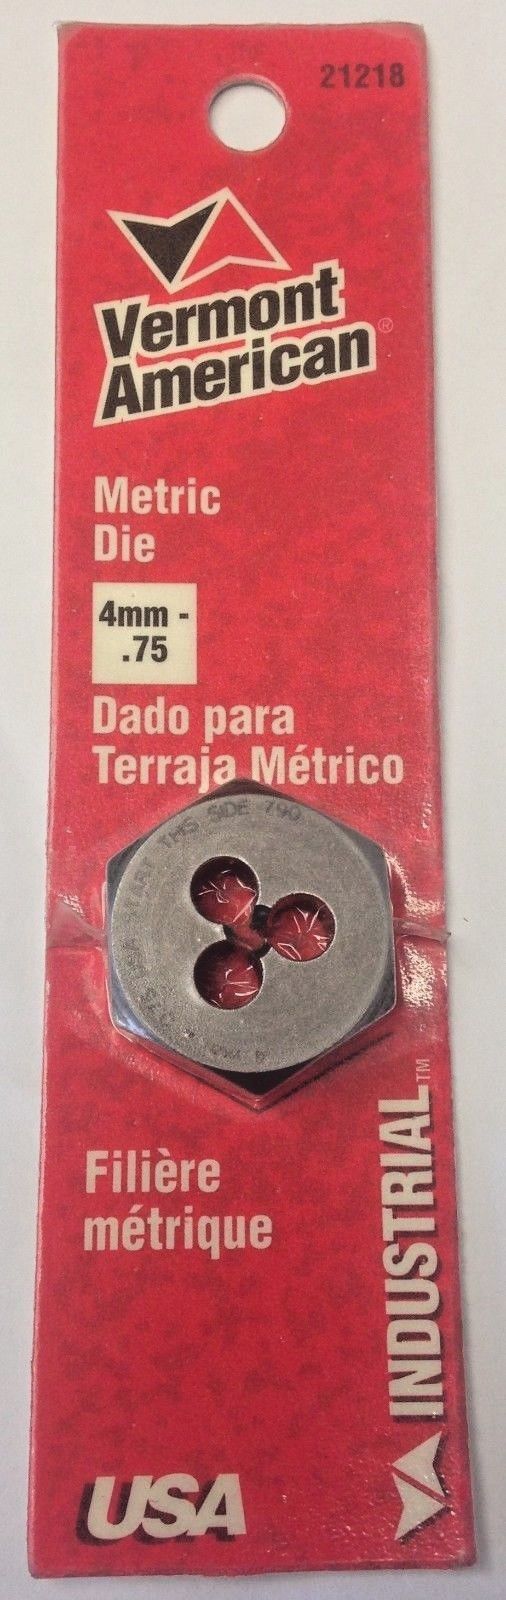 Vermont American 21218 4mm to 0.75 1" High Carbon Steel Metric Hex Die USA